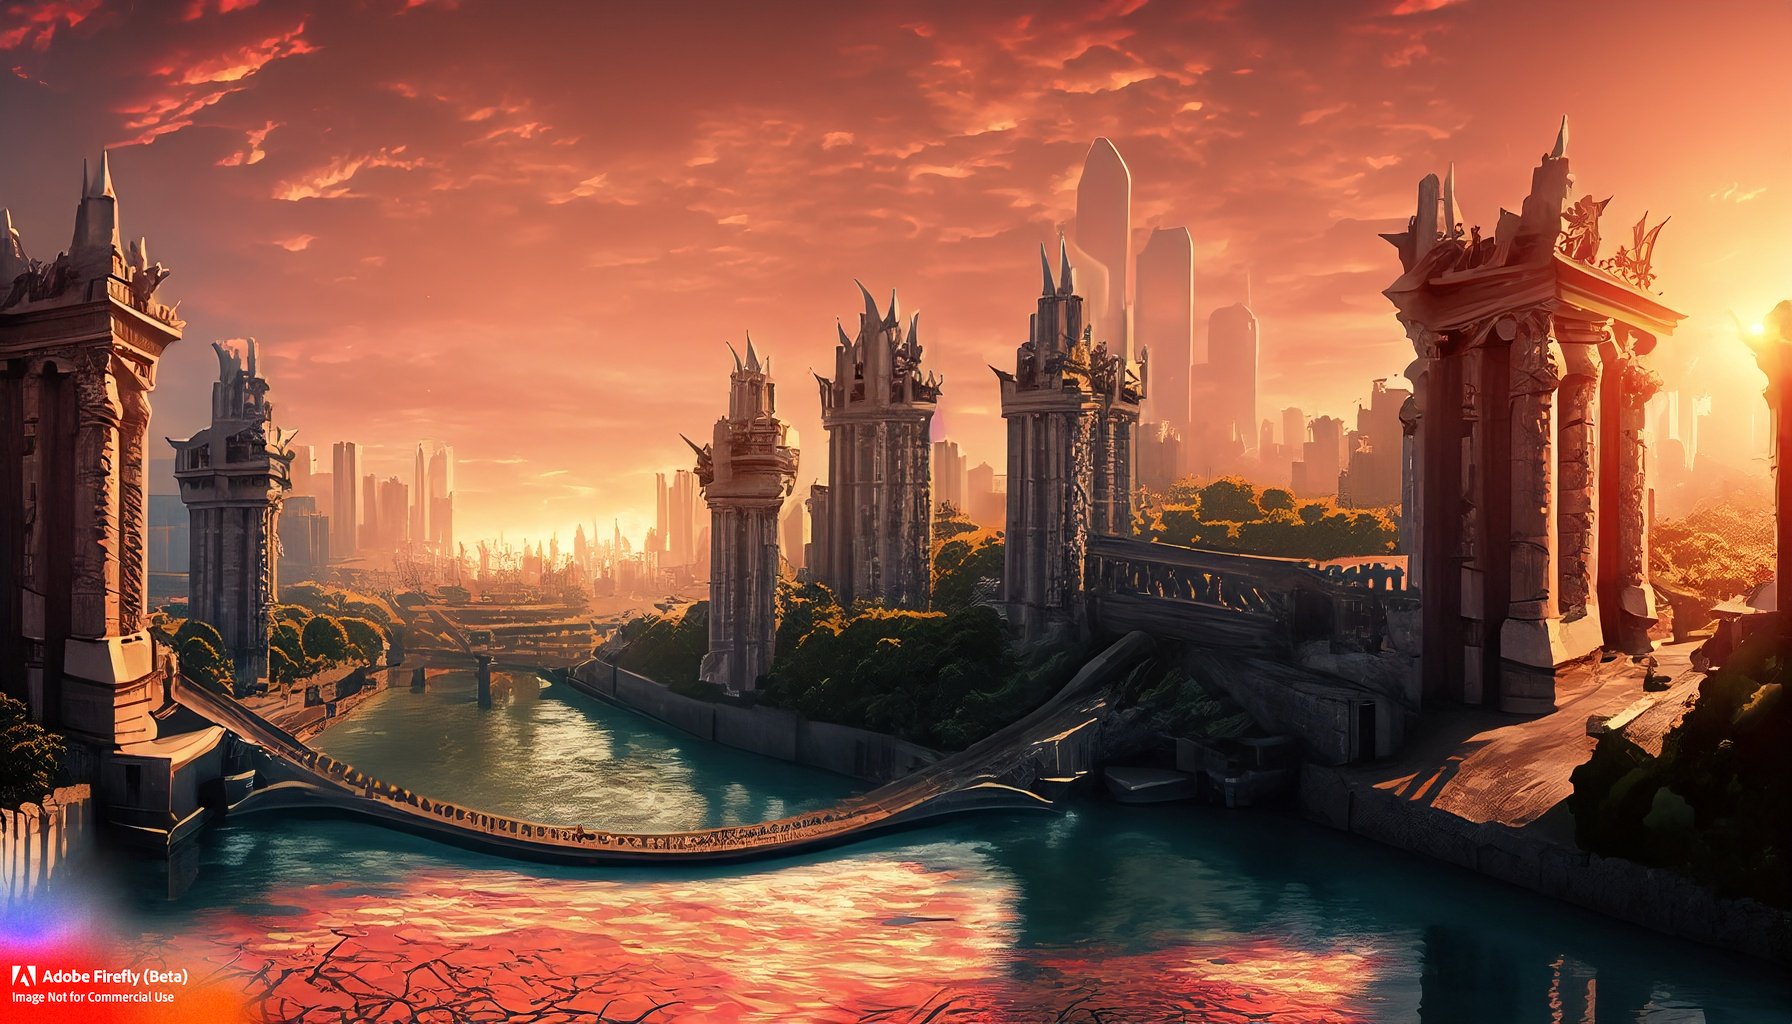 Firefly_a+modern city, and 7 ancient gates spread throughout, a river splitting the city, fantasy vibes, red sunrise, theater building_photo_74400.jpg